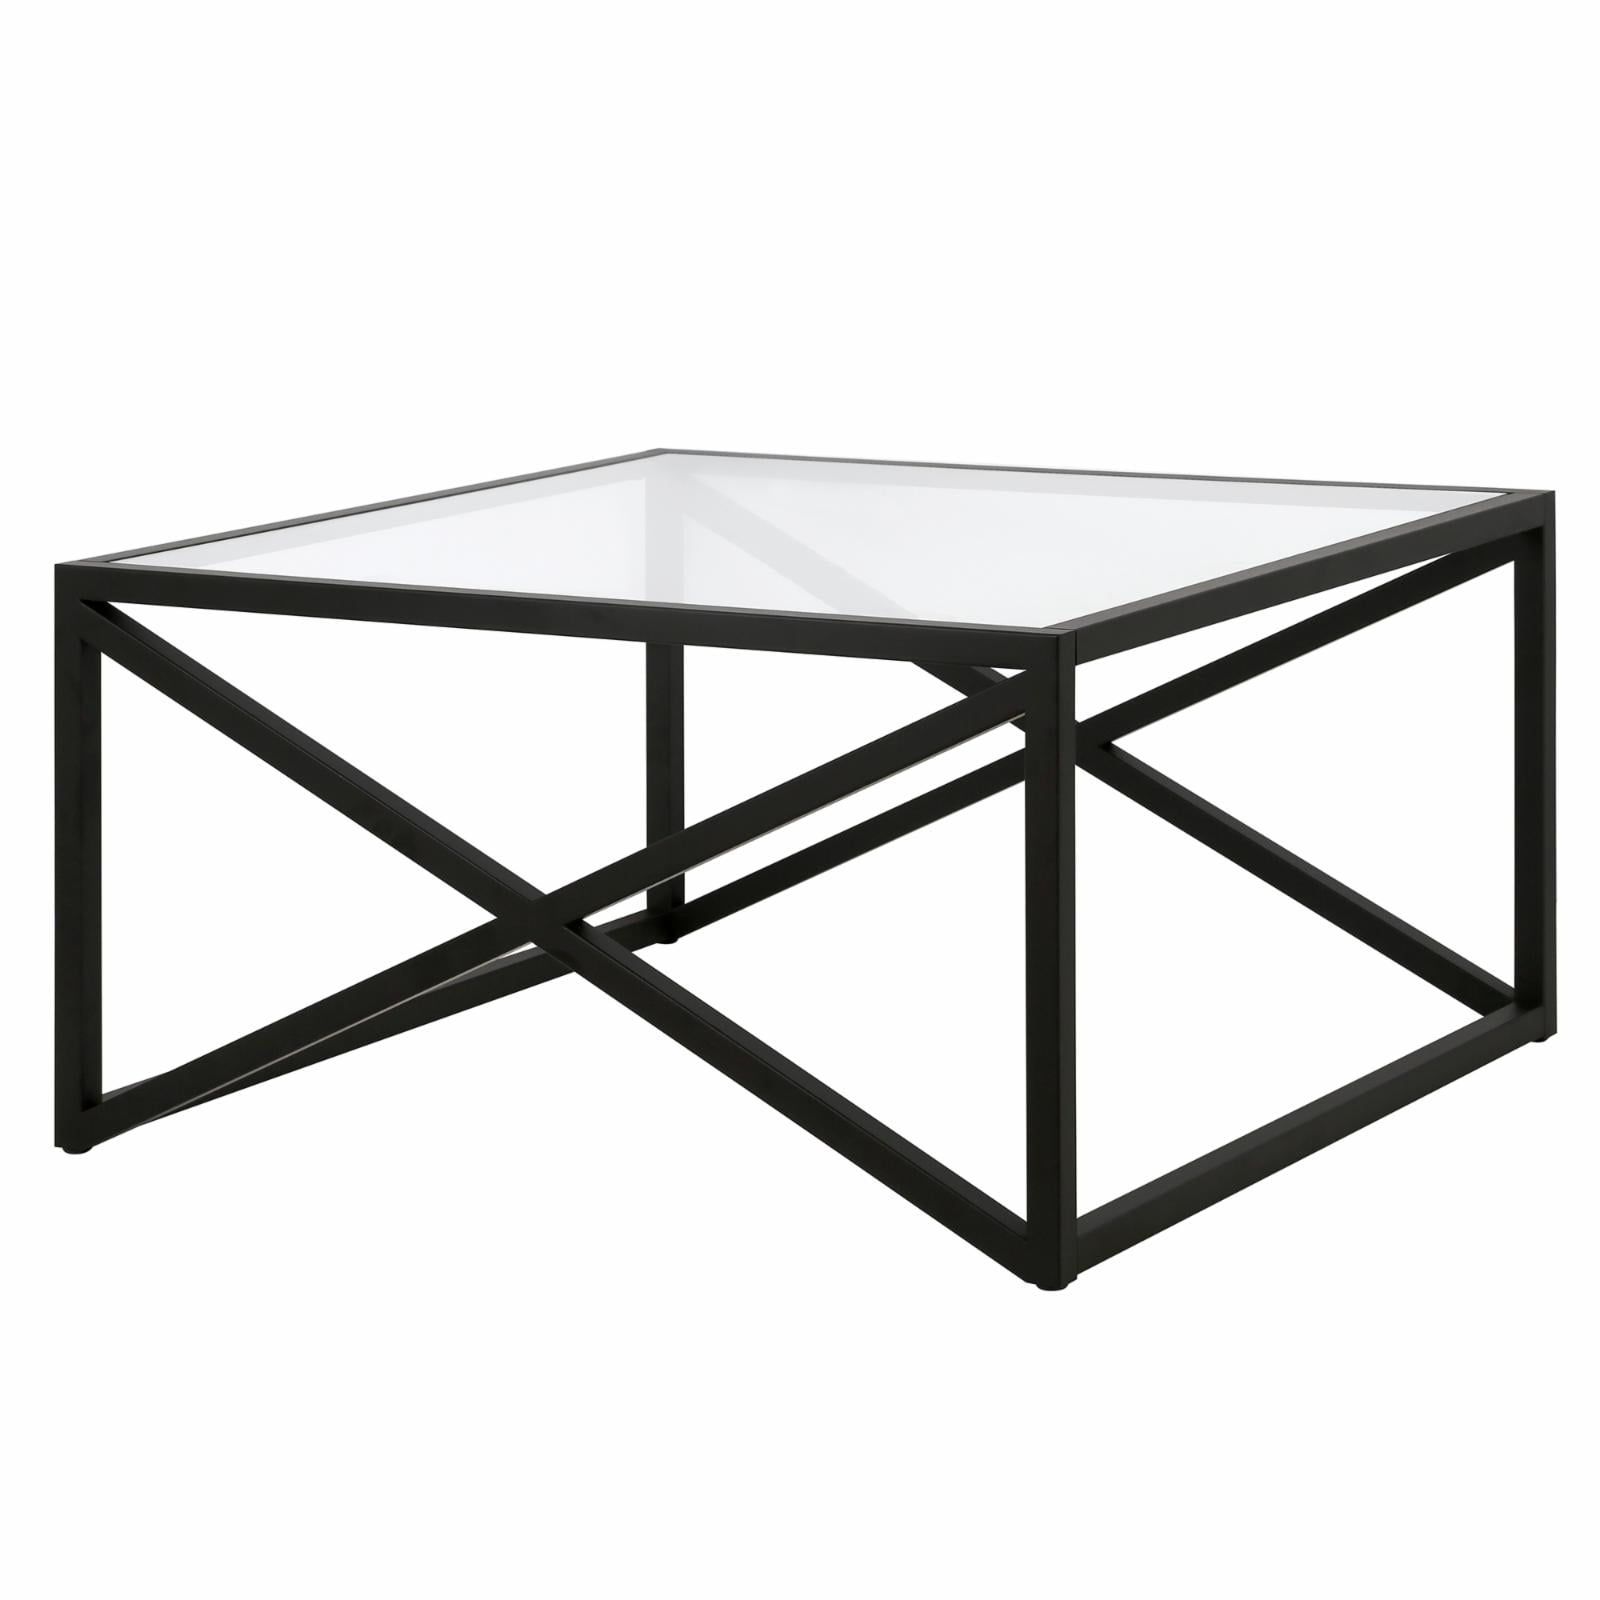 Latest Addison&lane Calix Square Tables Within Addison&lane Calix Square Coffee Table – Walmart (Photo 1 of 15)